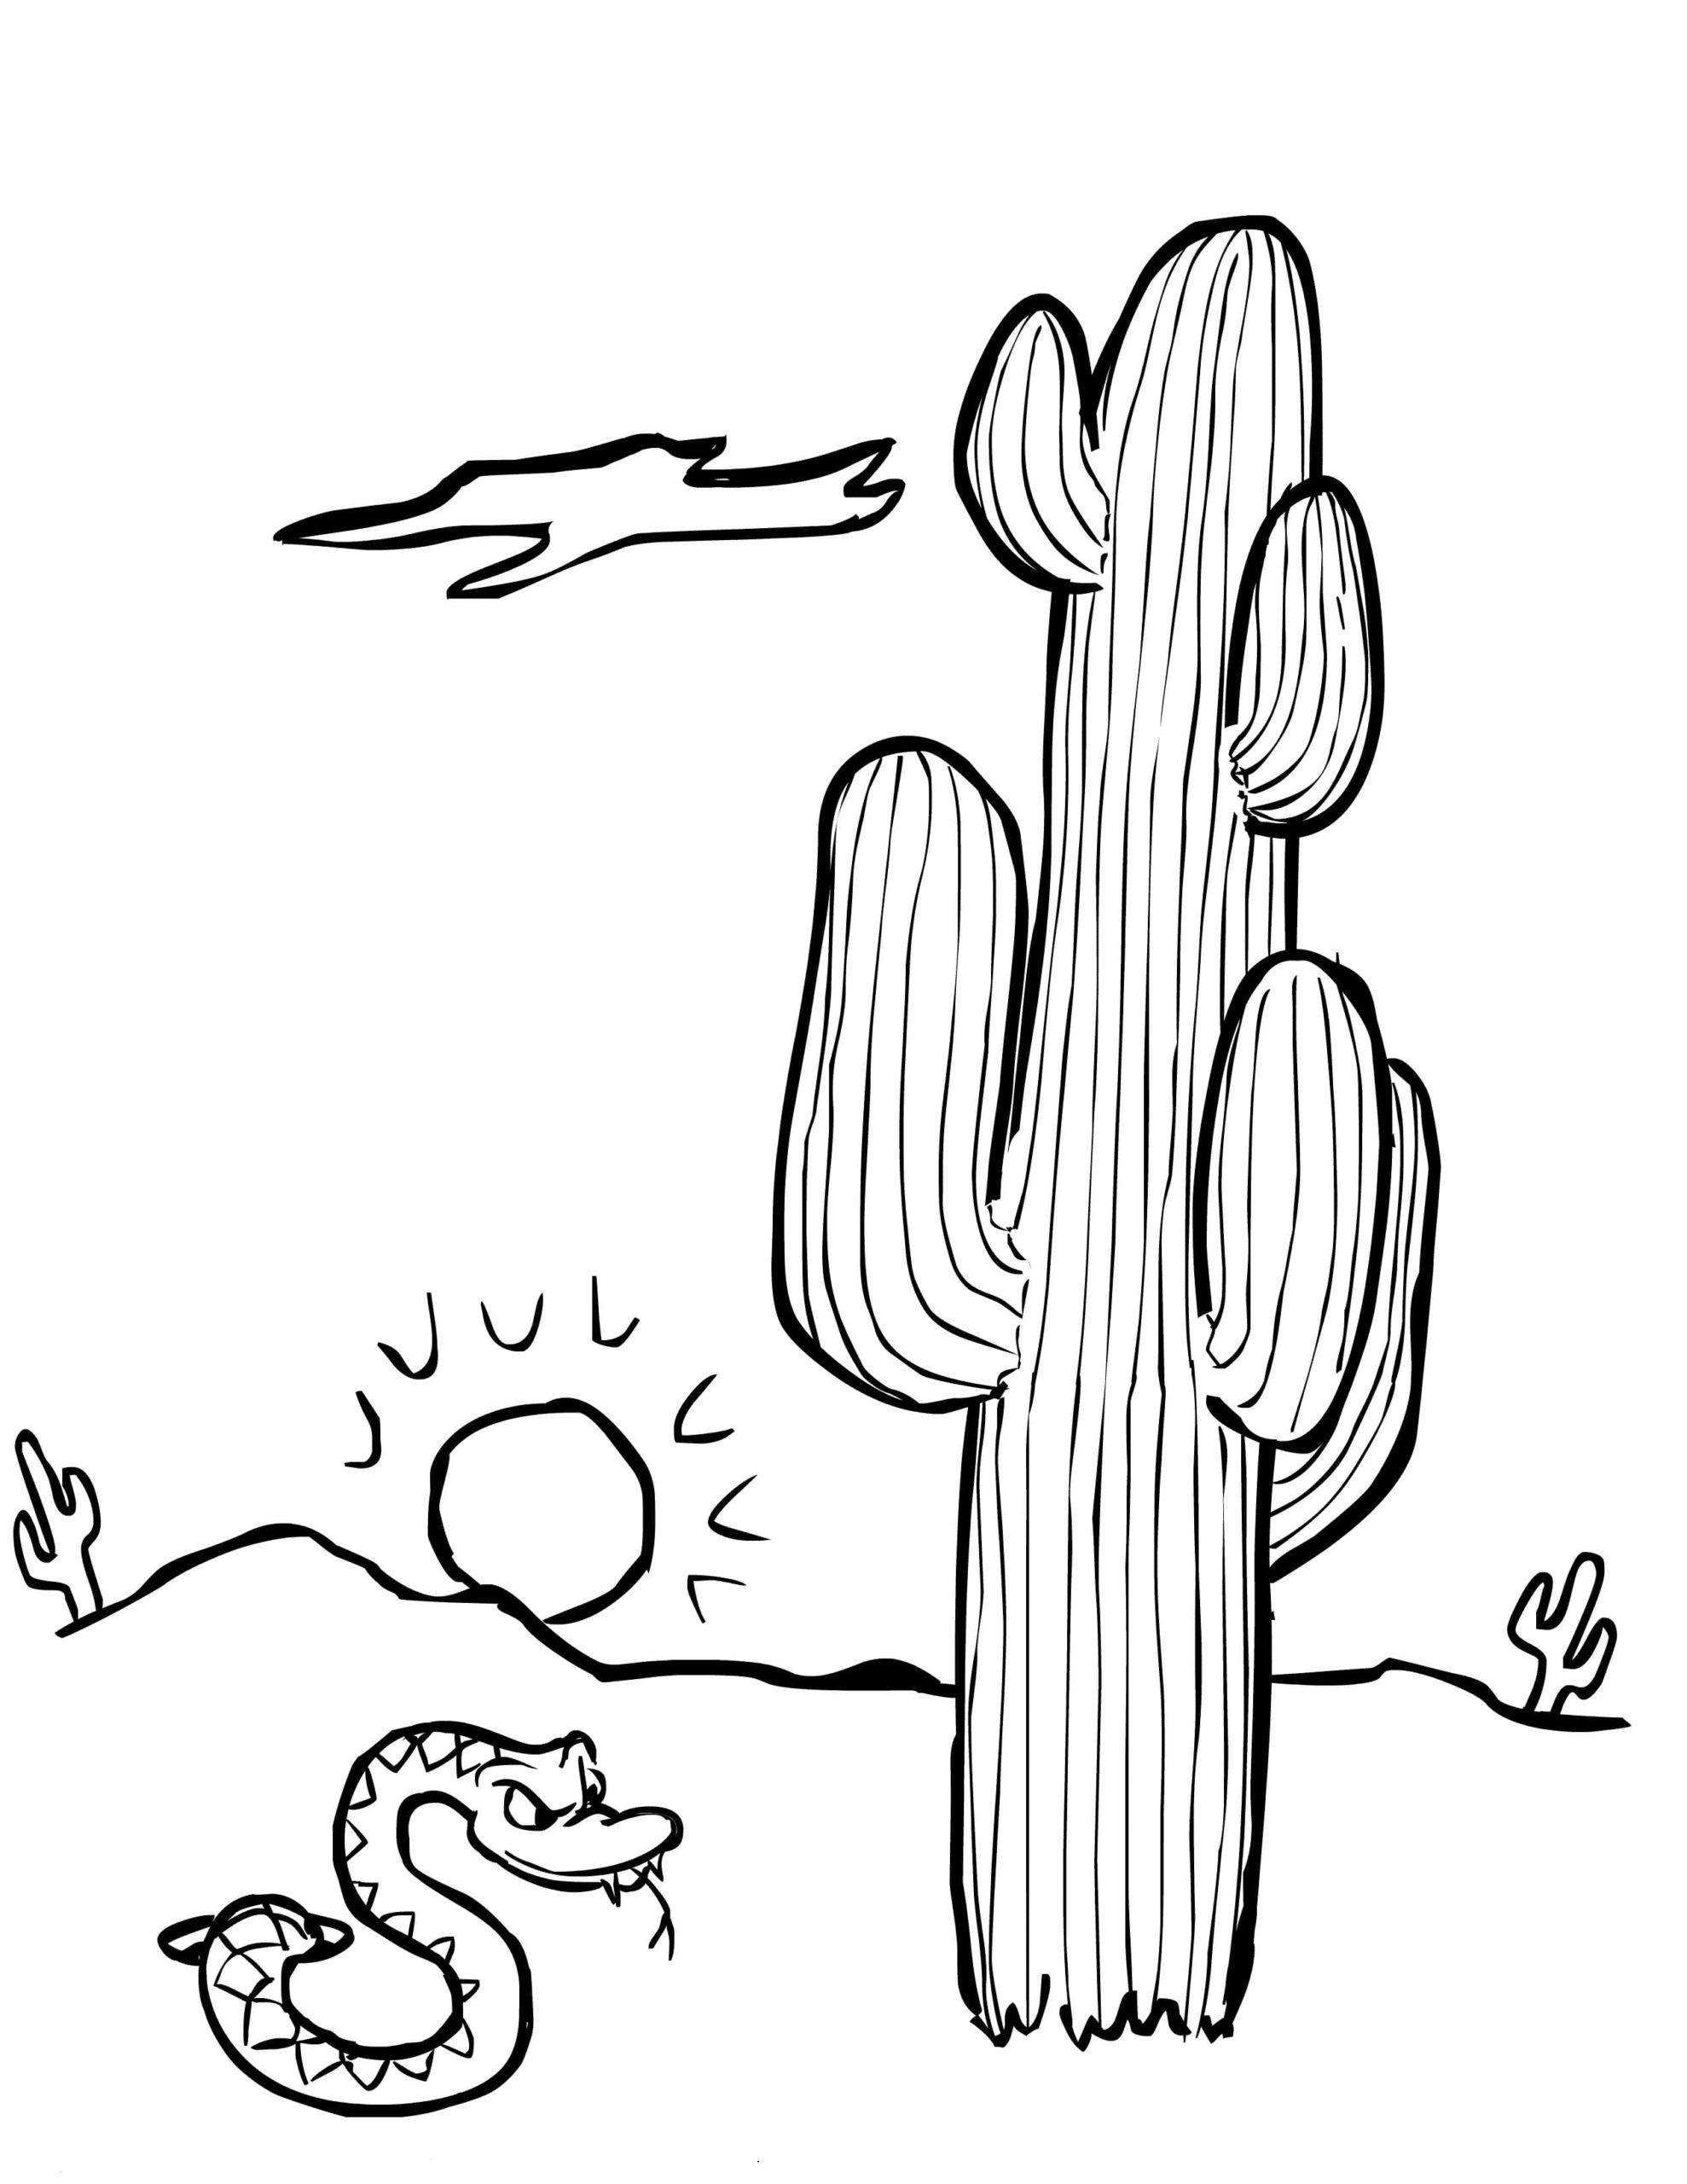 A Wild Snake Lurked Behind A Cactus